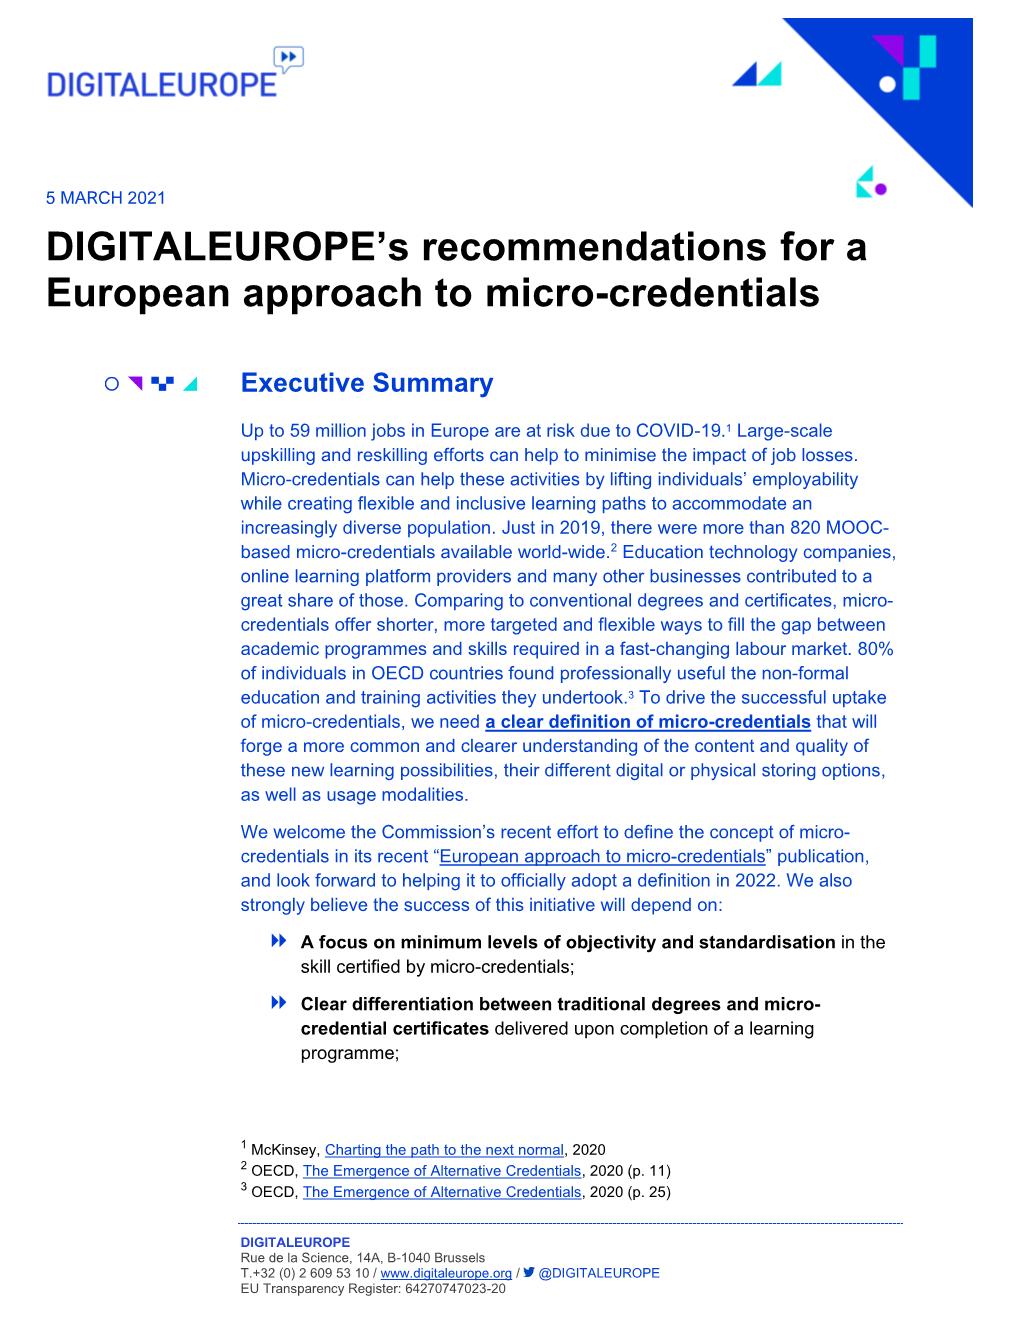 DIGITALEUROPE's Recommendations for a European Approach to Micro-Credentials